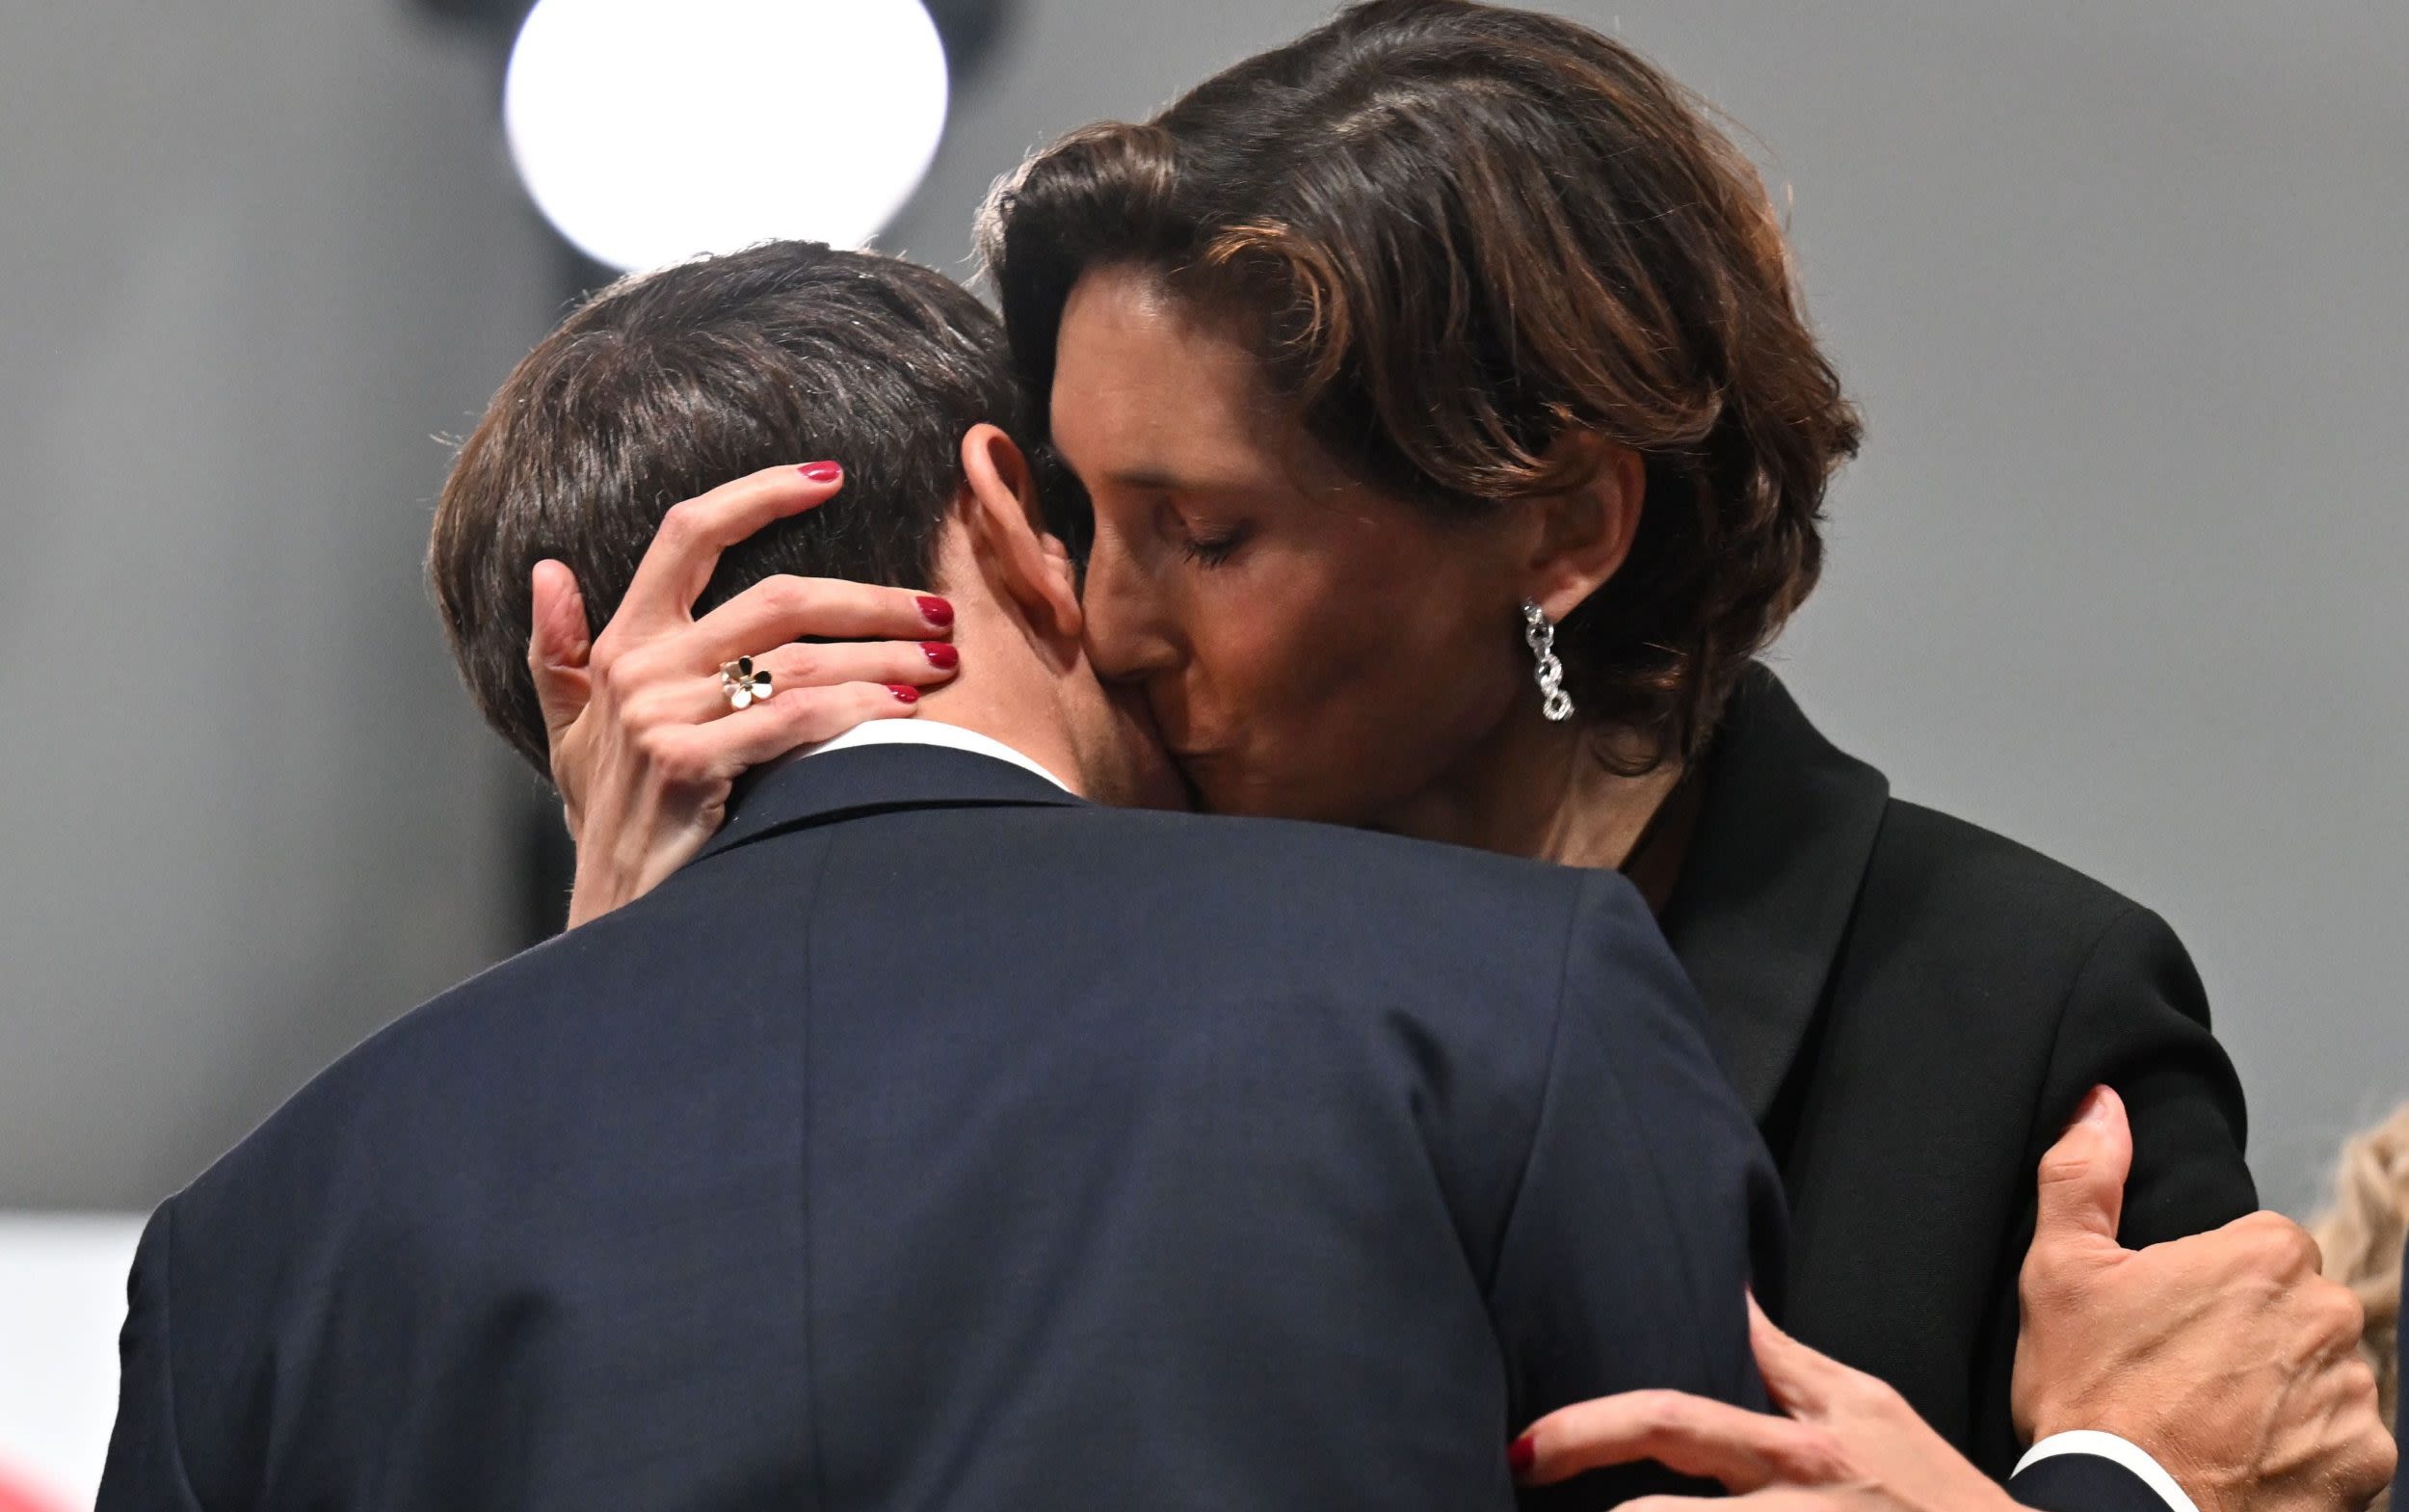 Pictured: ‘Curious kiss’ between Macron and French sports minister